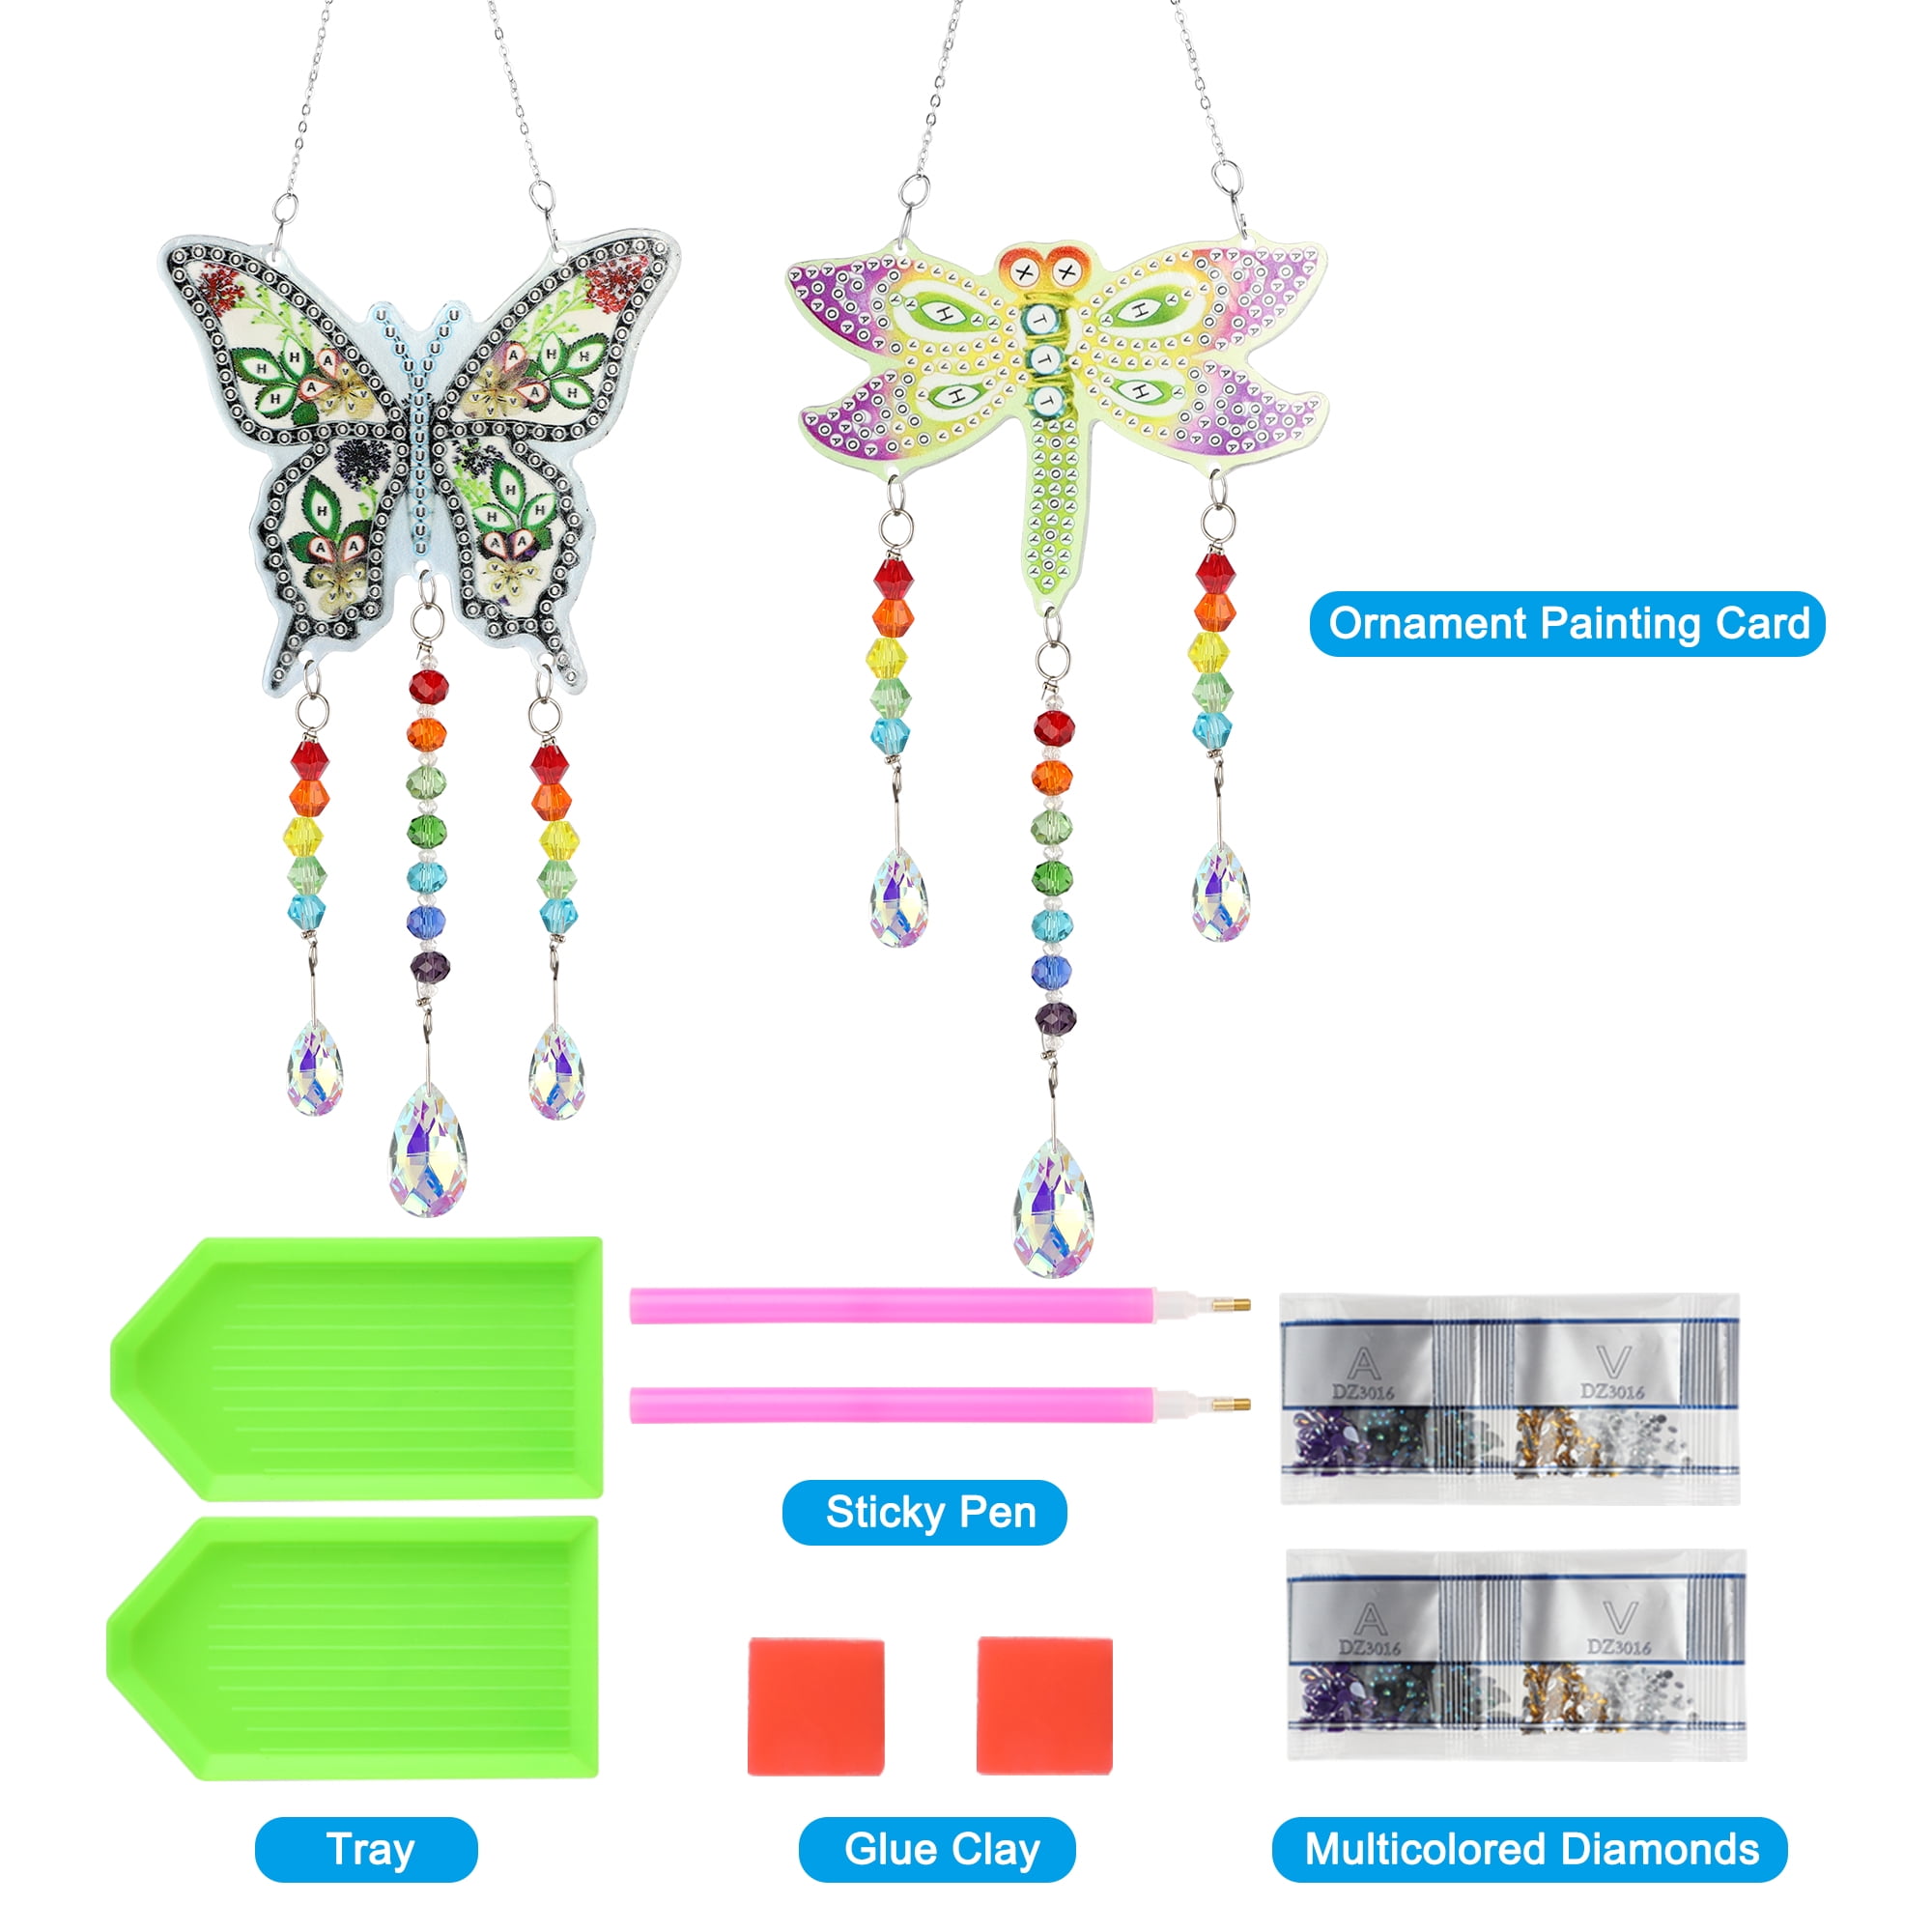 SkyAuks Diamond Painting Kit, DIY Hummingbird Window Hanging Ornament, Crystal Suncatcher Wind Chime Double Sided Gem Paint by Number for Home Garden